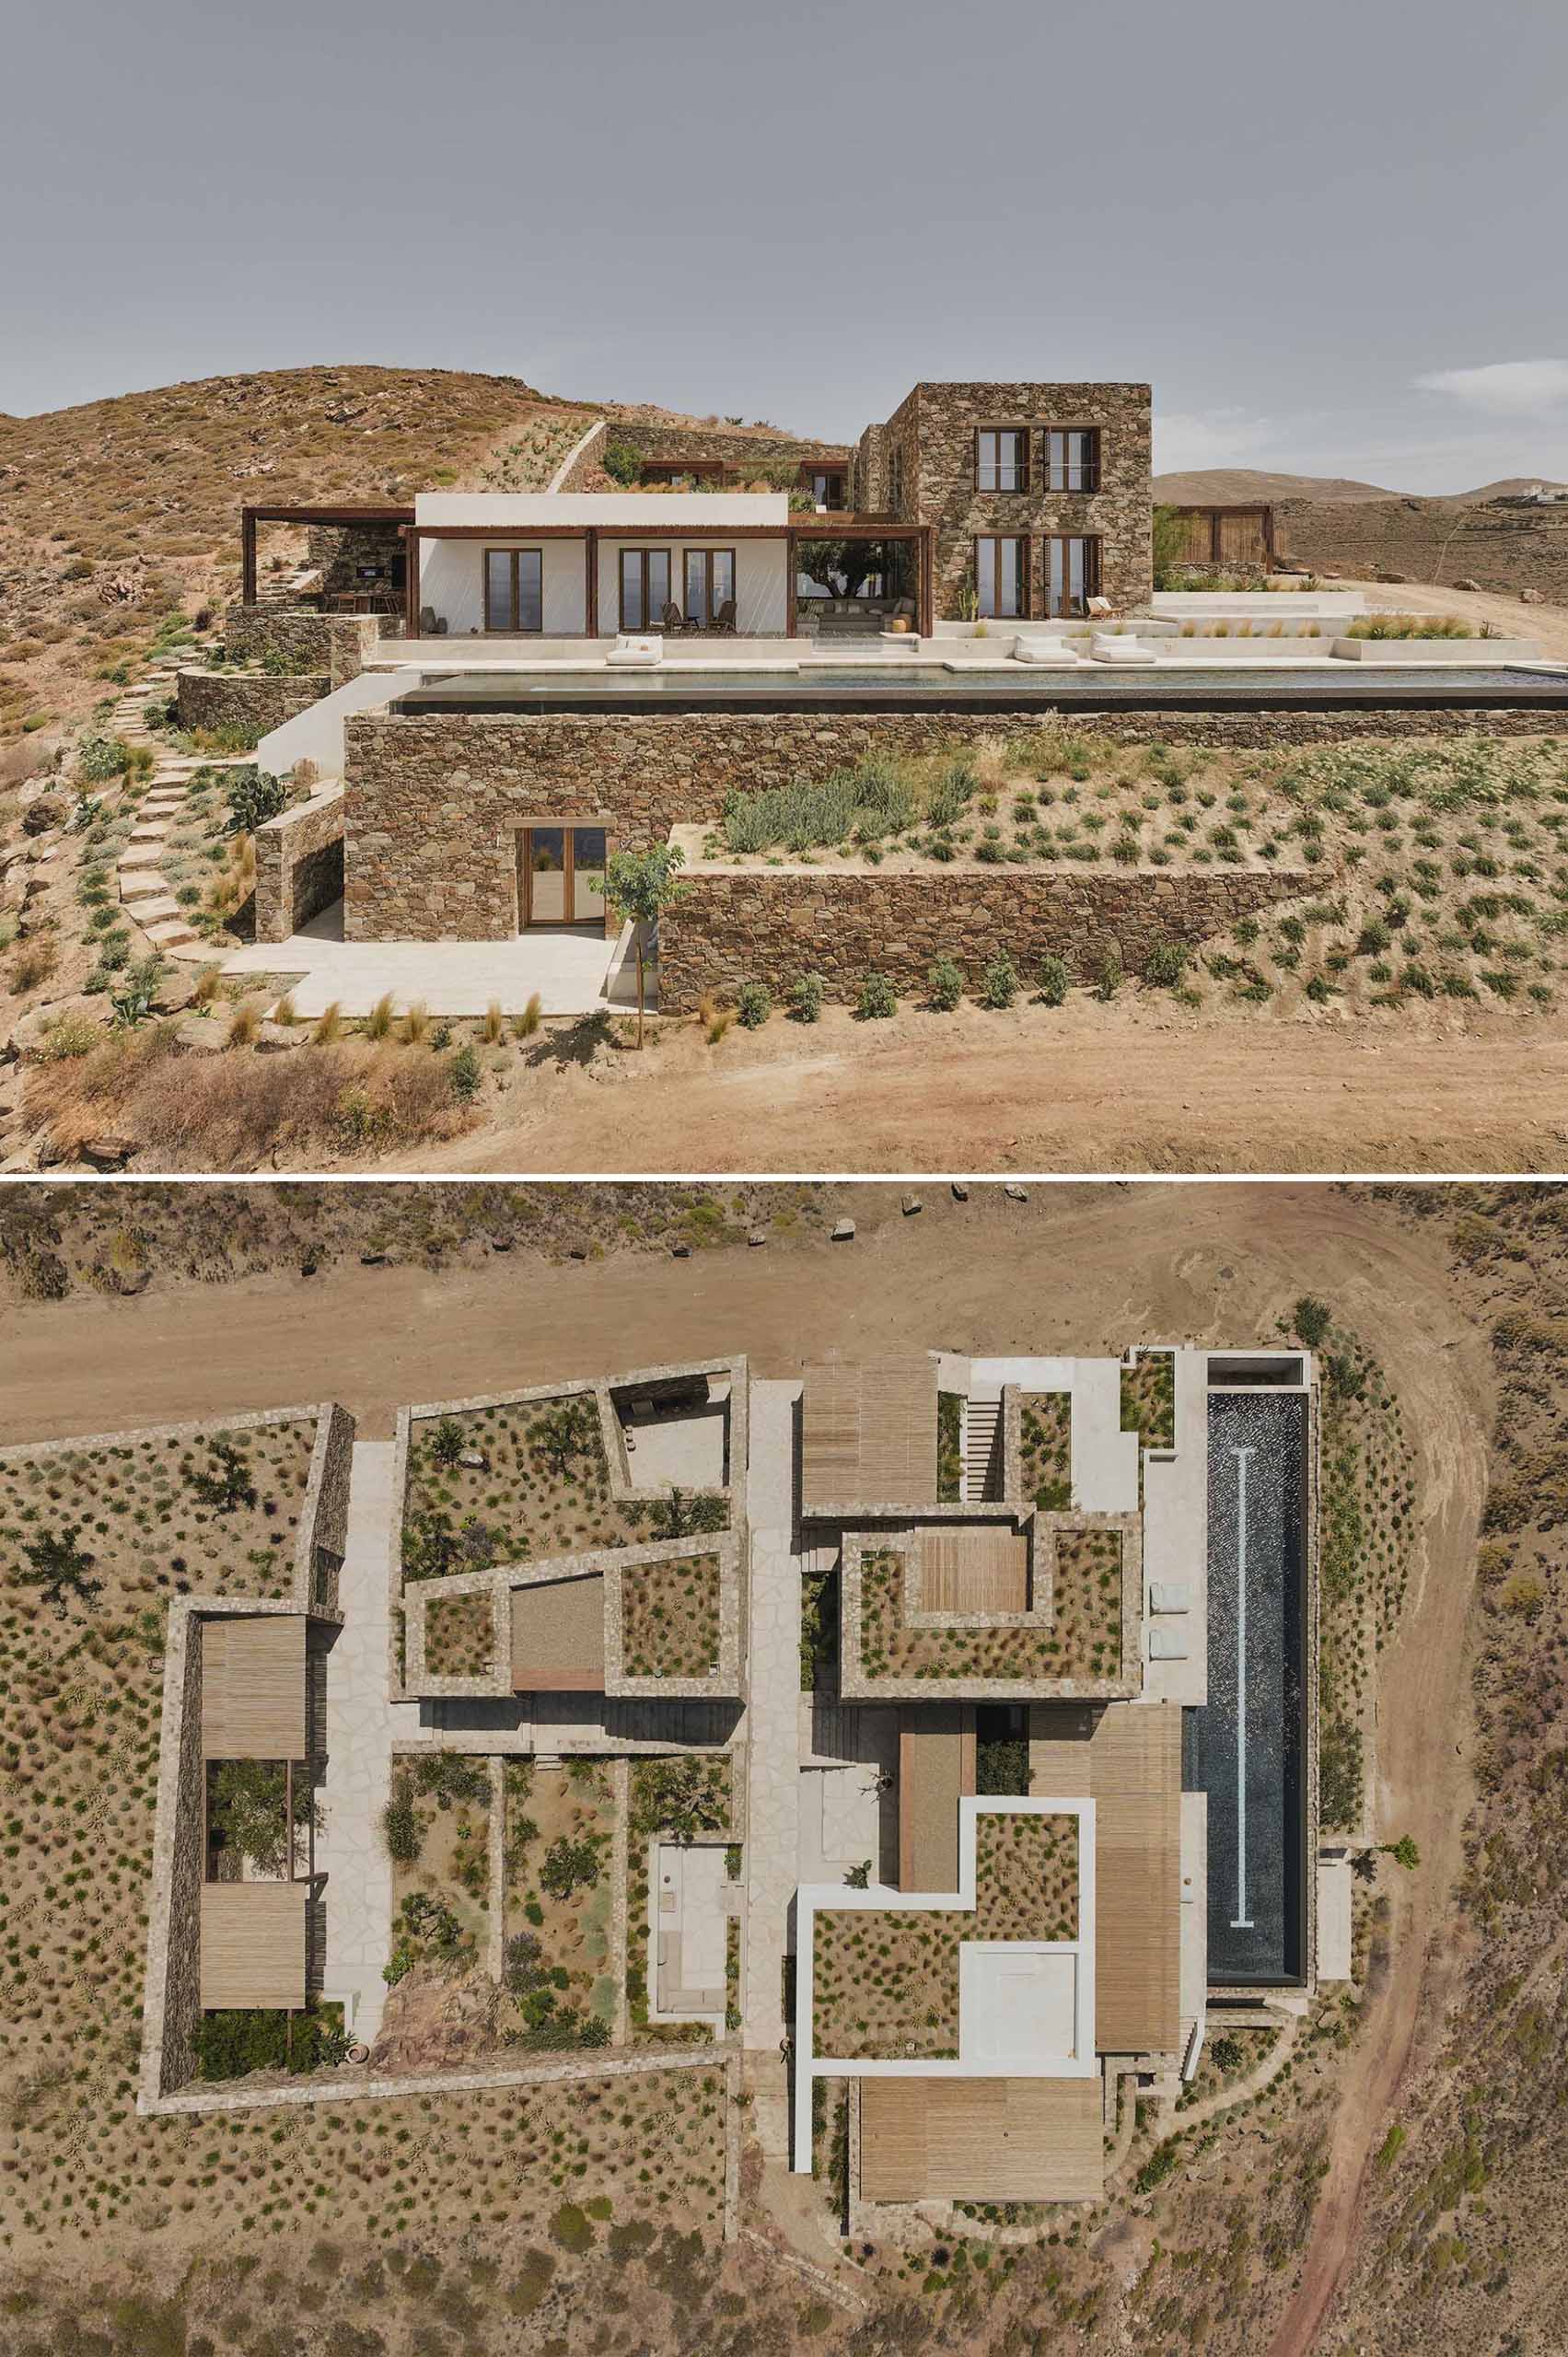 Key to the design of this modern home are the multiple green roofs that help the home seamlessly blend into the surrounding landscape.